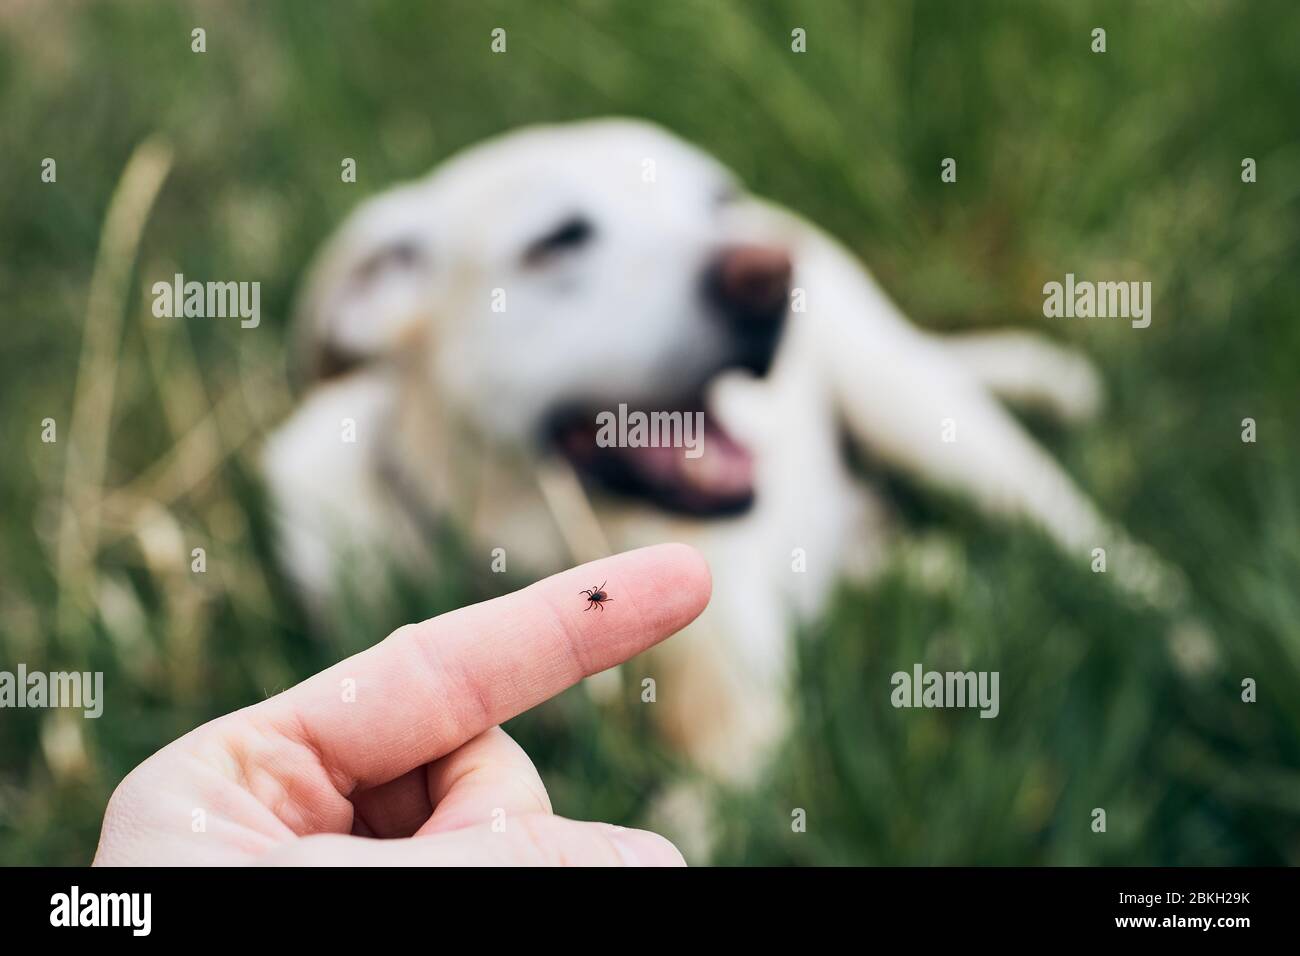 Close-up view of tick on human finger against dog lying in grass. Stock Photo